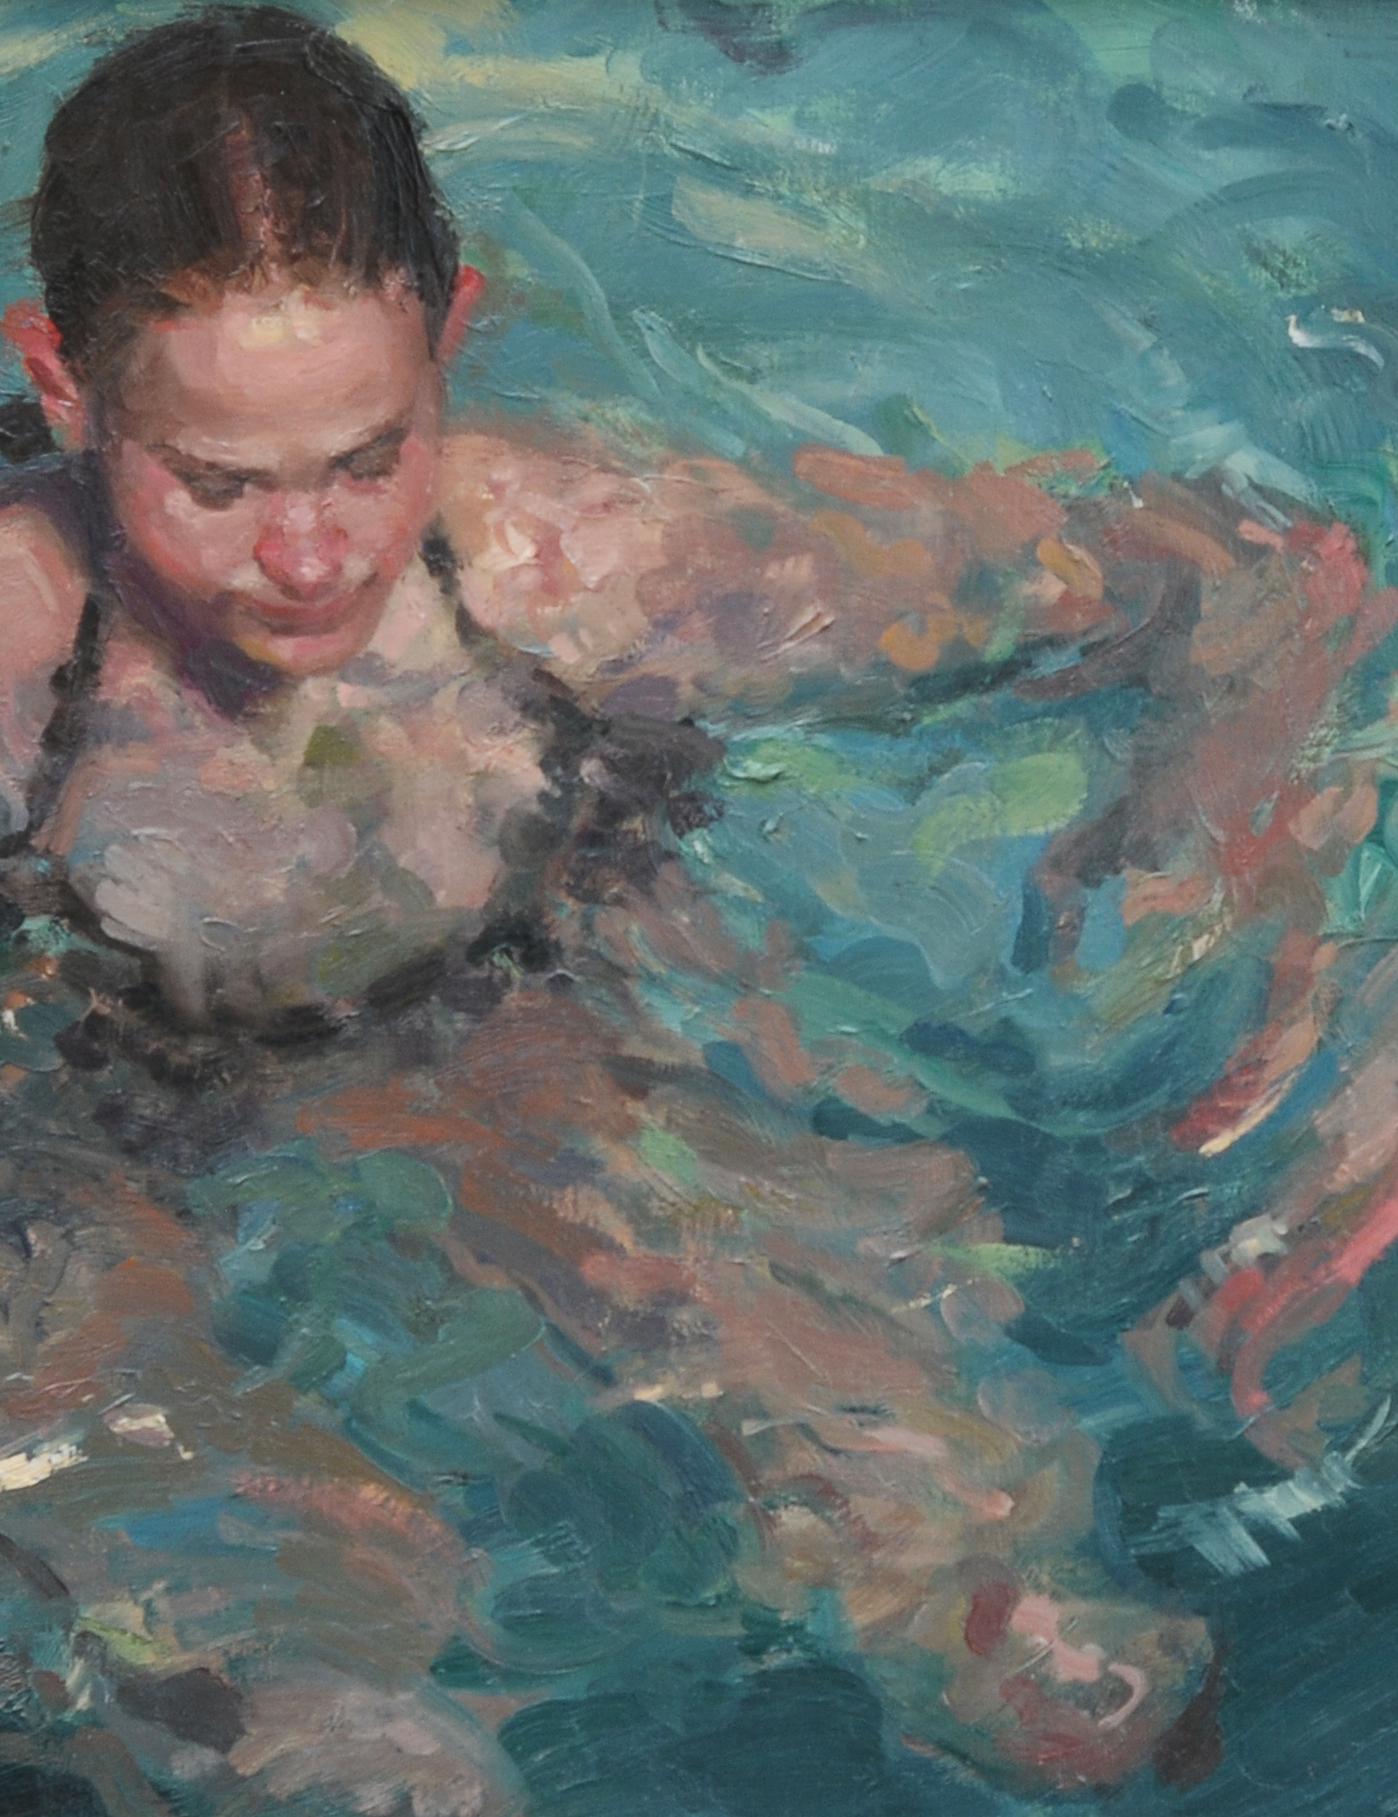 LOOK FOR FREE SHIPPING AT CHECKOUT

Rock Me Baby is a 14 x 20 figurative oil painting by E. Melinda Morrison. It was painted in 2019. Rock Me Baby shows the movement of the water rocking the woman in the water. E. Melinda Morrison shows the movement